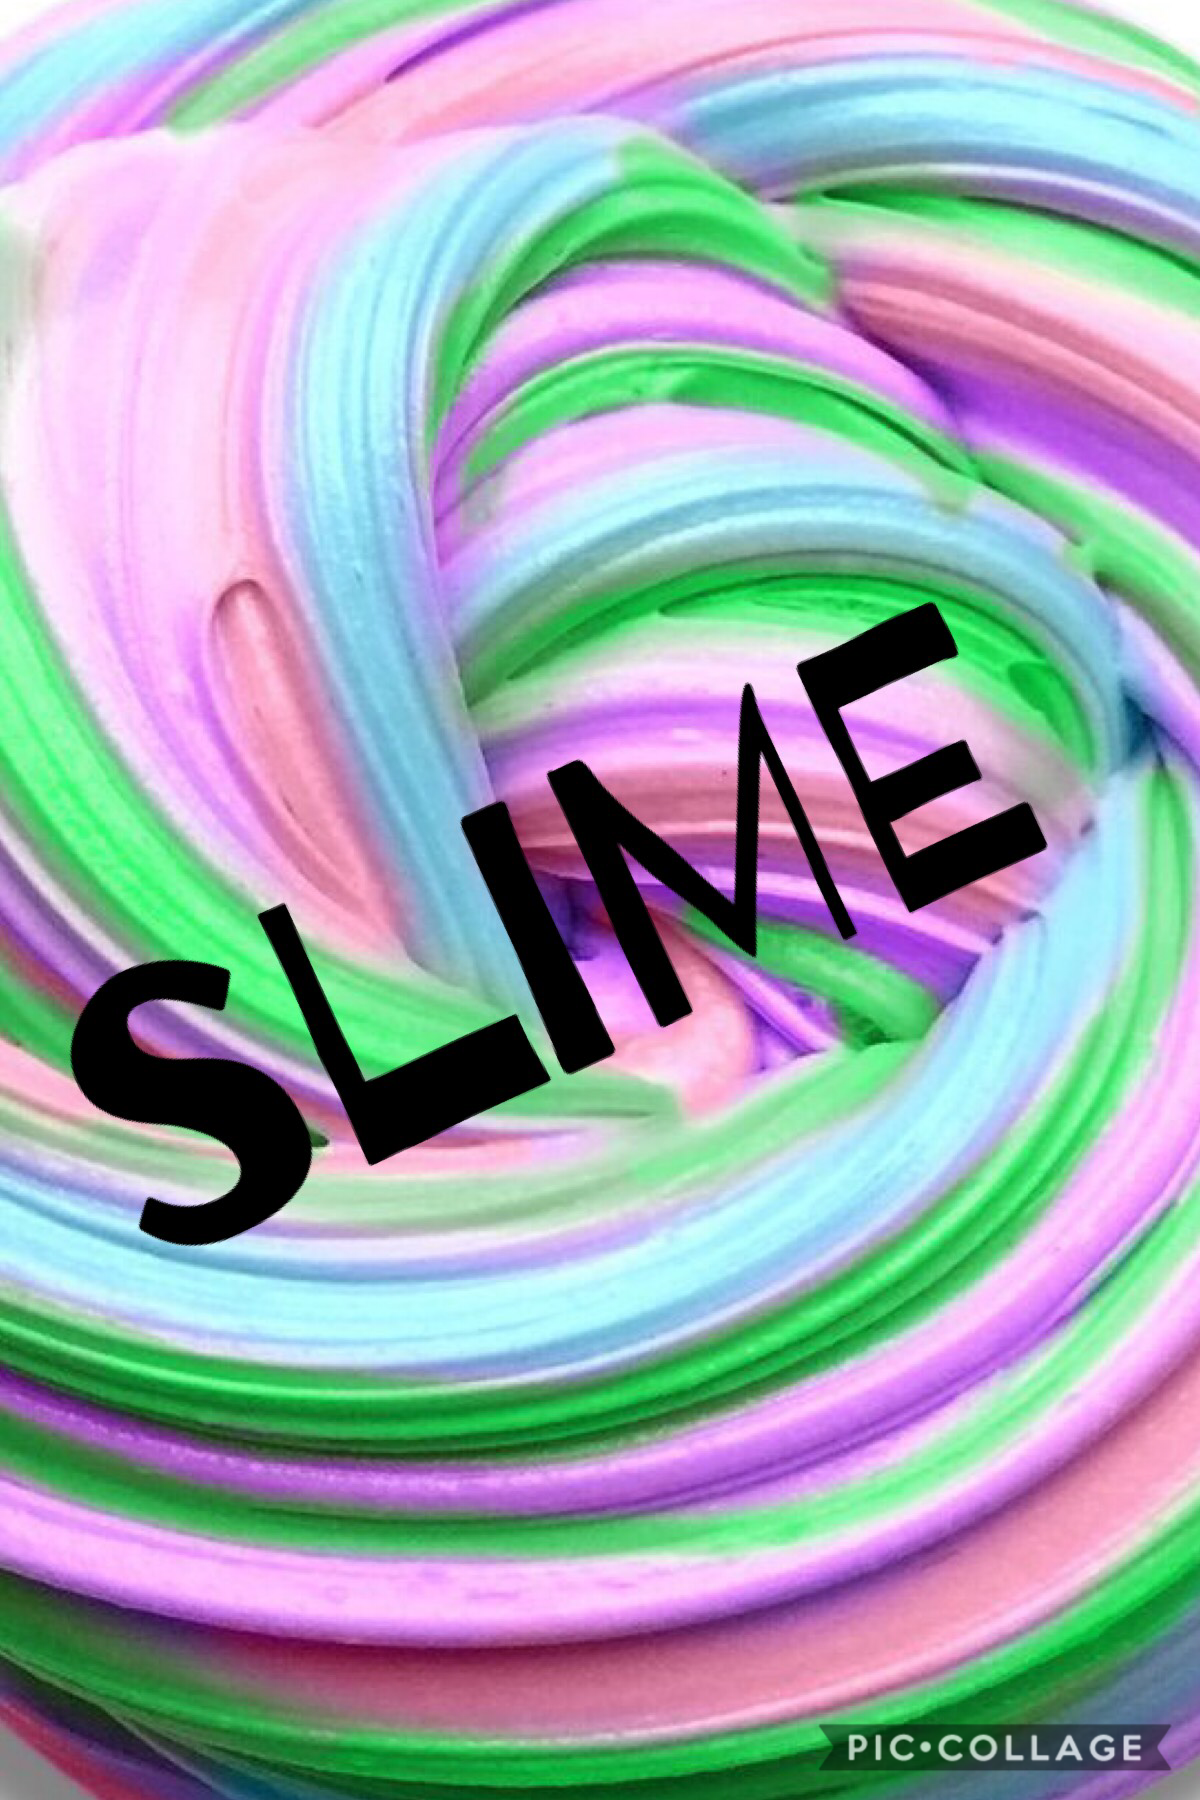 Don’t have this slime I just searched it up!